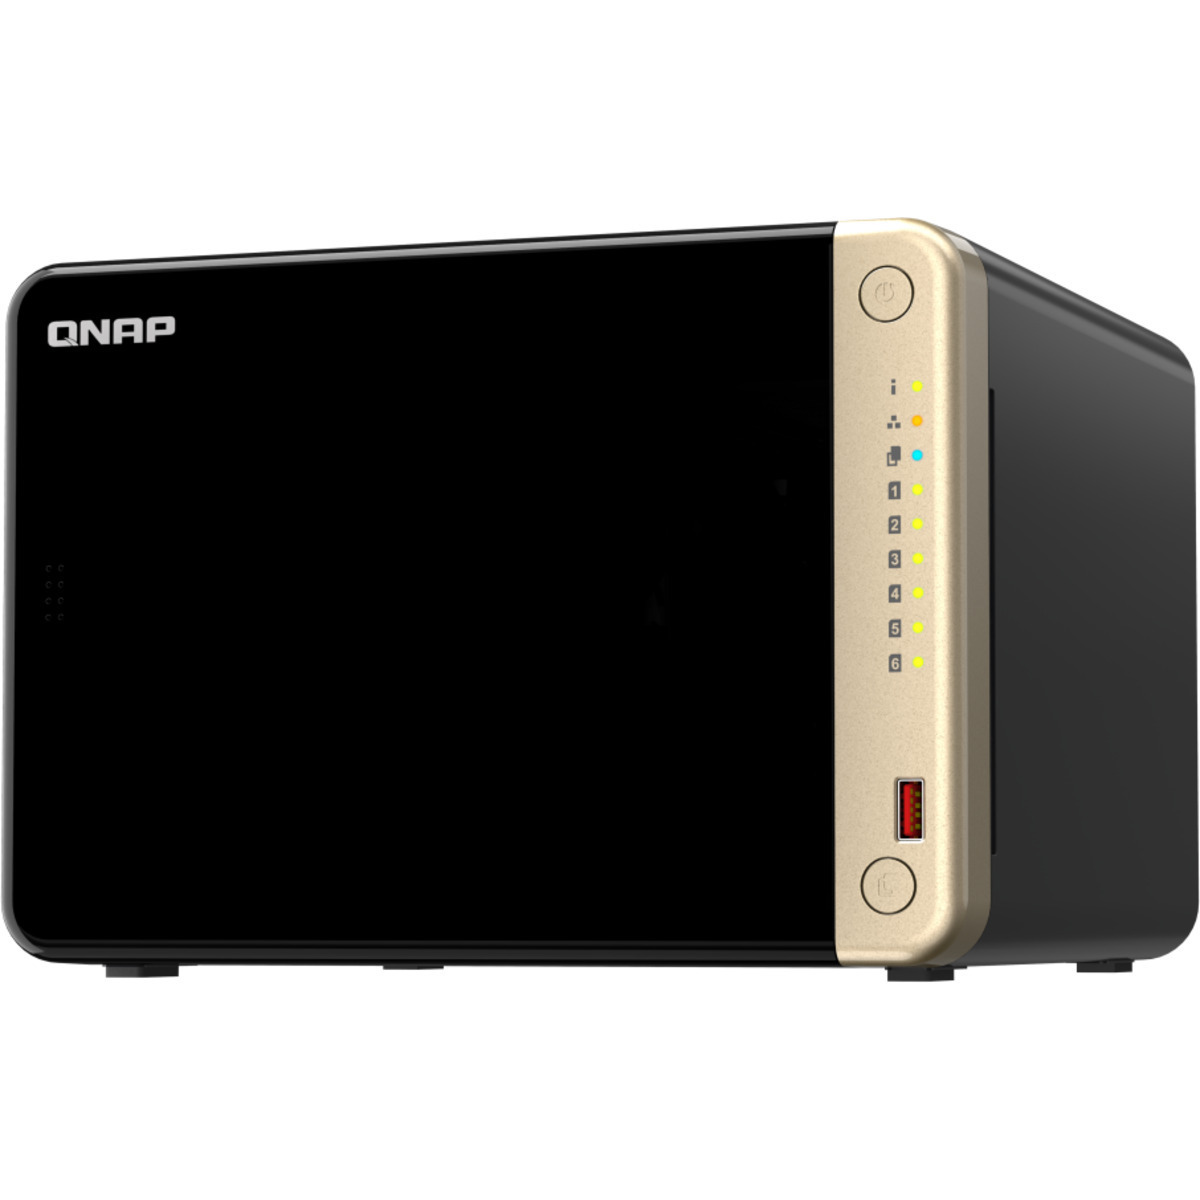 QNAP TS-664 132tb 6-Bay Desktop Multimedia / Power User / Business NAS - Network Attached Storage Device 6x22tb Seagate IronWolf Pro ST22000NT001 3.5 7200rpm SATA 6Gb/s HDD NAS Class Drives Installed - Burn-In Tested TS-664